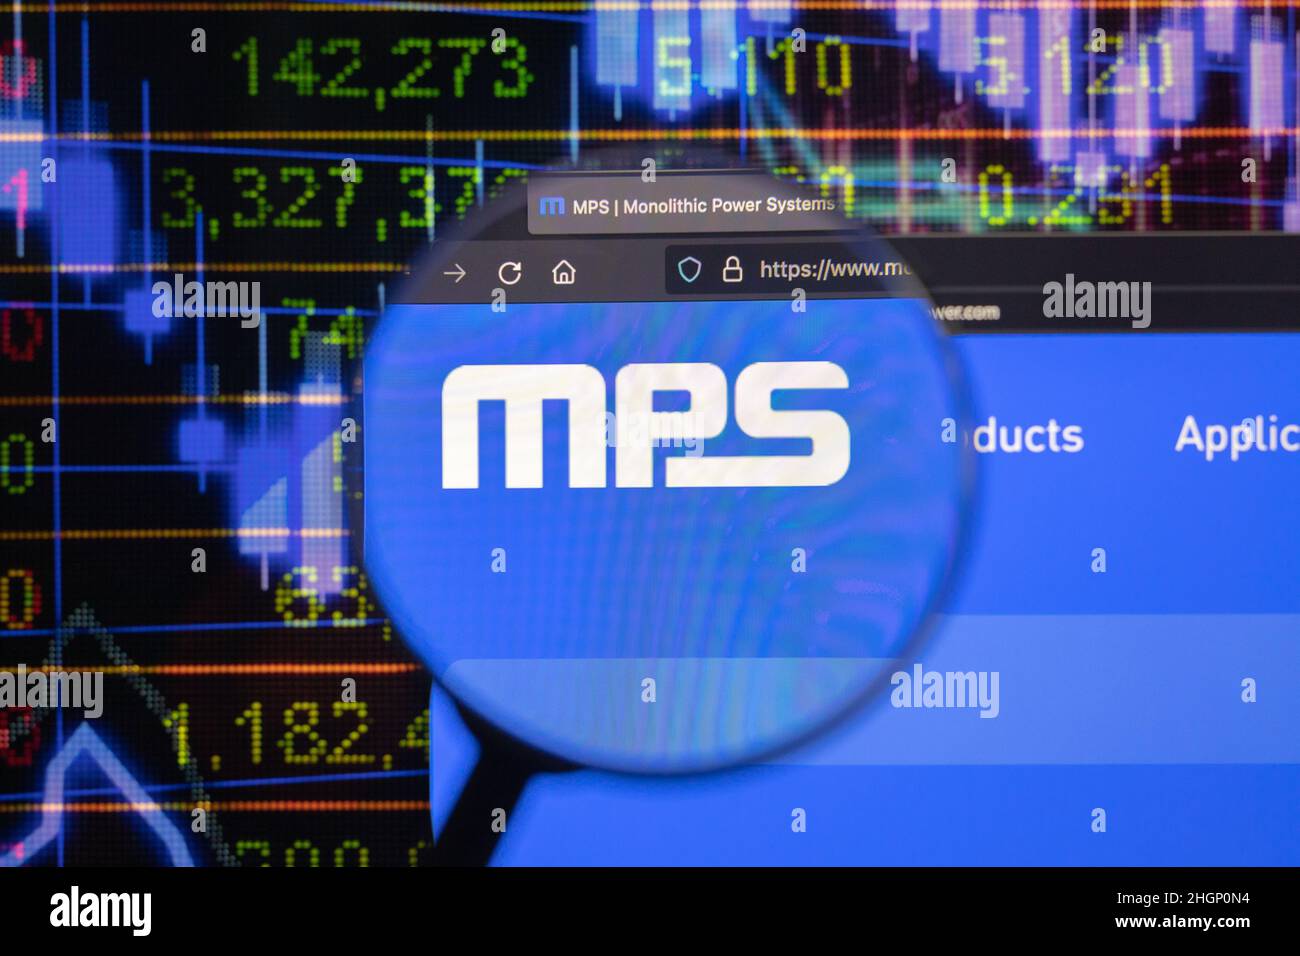 MPS company logo on a website with blurry stock market developments in the background, seen on a computer screen through a magnifying glass. Stock Photo